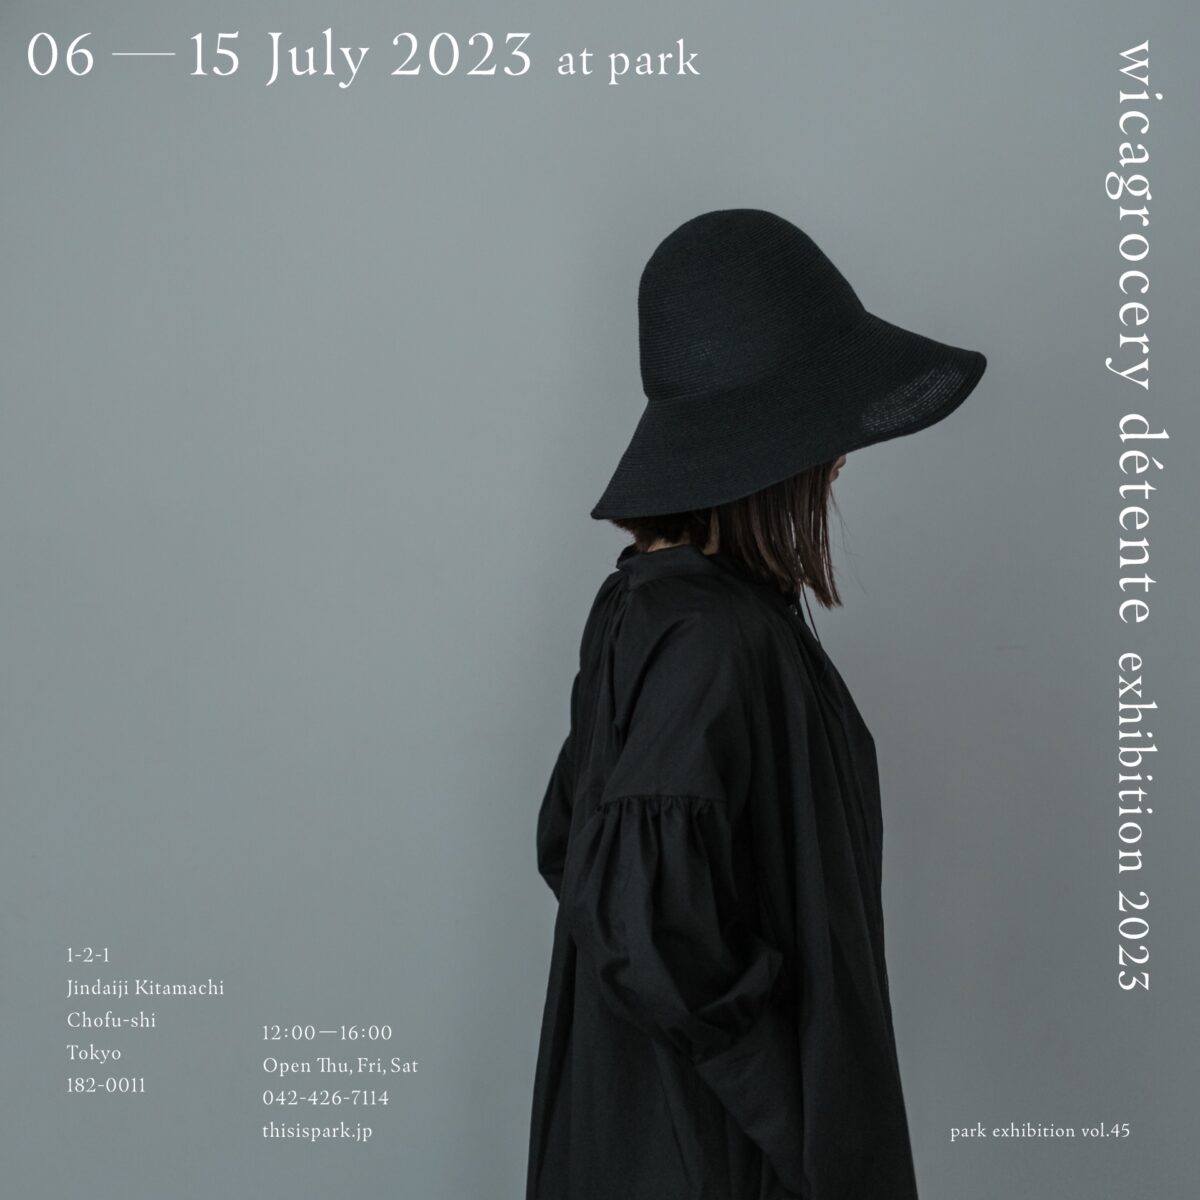 【wicagrocery détente Exhibition 2023】開催のお知らせ